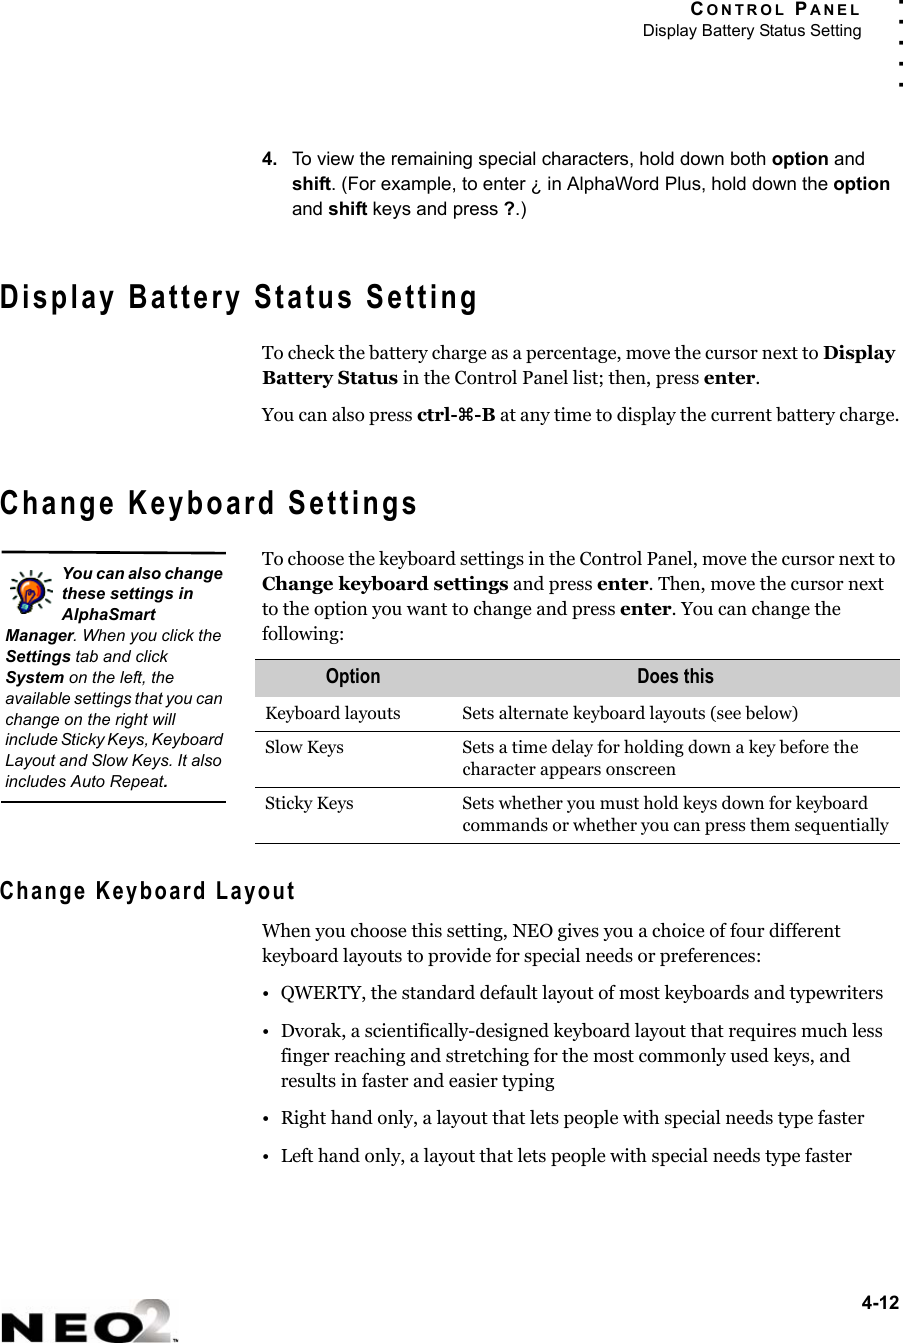 CONTROL PANELDisplay Battery Status Setting4-12. . . . .4. To view the remaining special characters, hold down both option and shift. (For example, to enter ¿ in AlphaWord Plus, hold down the option and shift keys and press ?.)Display Battery Status SettingTo check the battery charge as a percentage, move the cursor next to Display Battery Status in the Control Panel list; then, press enter.You can also press ctrl-z-B at any time to display the current battery charge.Change Keyboard SettingsTo choose the keyboard settings in the Control Panel, move the cursor next to Change keyboard settings and press enter. Then, move the cursor next to the option you want to change and press enter. You can change the following:Change Keyboard LayoutWhen you choose this setting, NEO gives you a choice of four different keyboard layouts to provide for special needs or preferences:• QWERTY, the standard default layout of most keyboards and typewriters• Dvorak, a scientifically-designed keyboard layout that requires much less finger reaching and stretching for the most commonly used keys, and results in faster and easier typing• Right hand only, a layout that lets people with special needs type faster • Left hand only, a layout that lets people with special needs type fasterOption Does thisKeyboard layouts Sets alternate keyboard layouts (see below)Slow Keys Sets a time delay for holding down a key before the character appears onscreenSticky Keys Sets whether you must hold keys down for keyboard commands or whether you can press them sequentiallyYou can also change these settings in AlphaSmart Manager. When you click the Settings tab and click System on the left, the available settings that you can change on the right will include Sticky Keys, Keyboard Layout and Slow Keys. It also includes Auto Repeat.